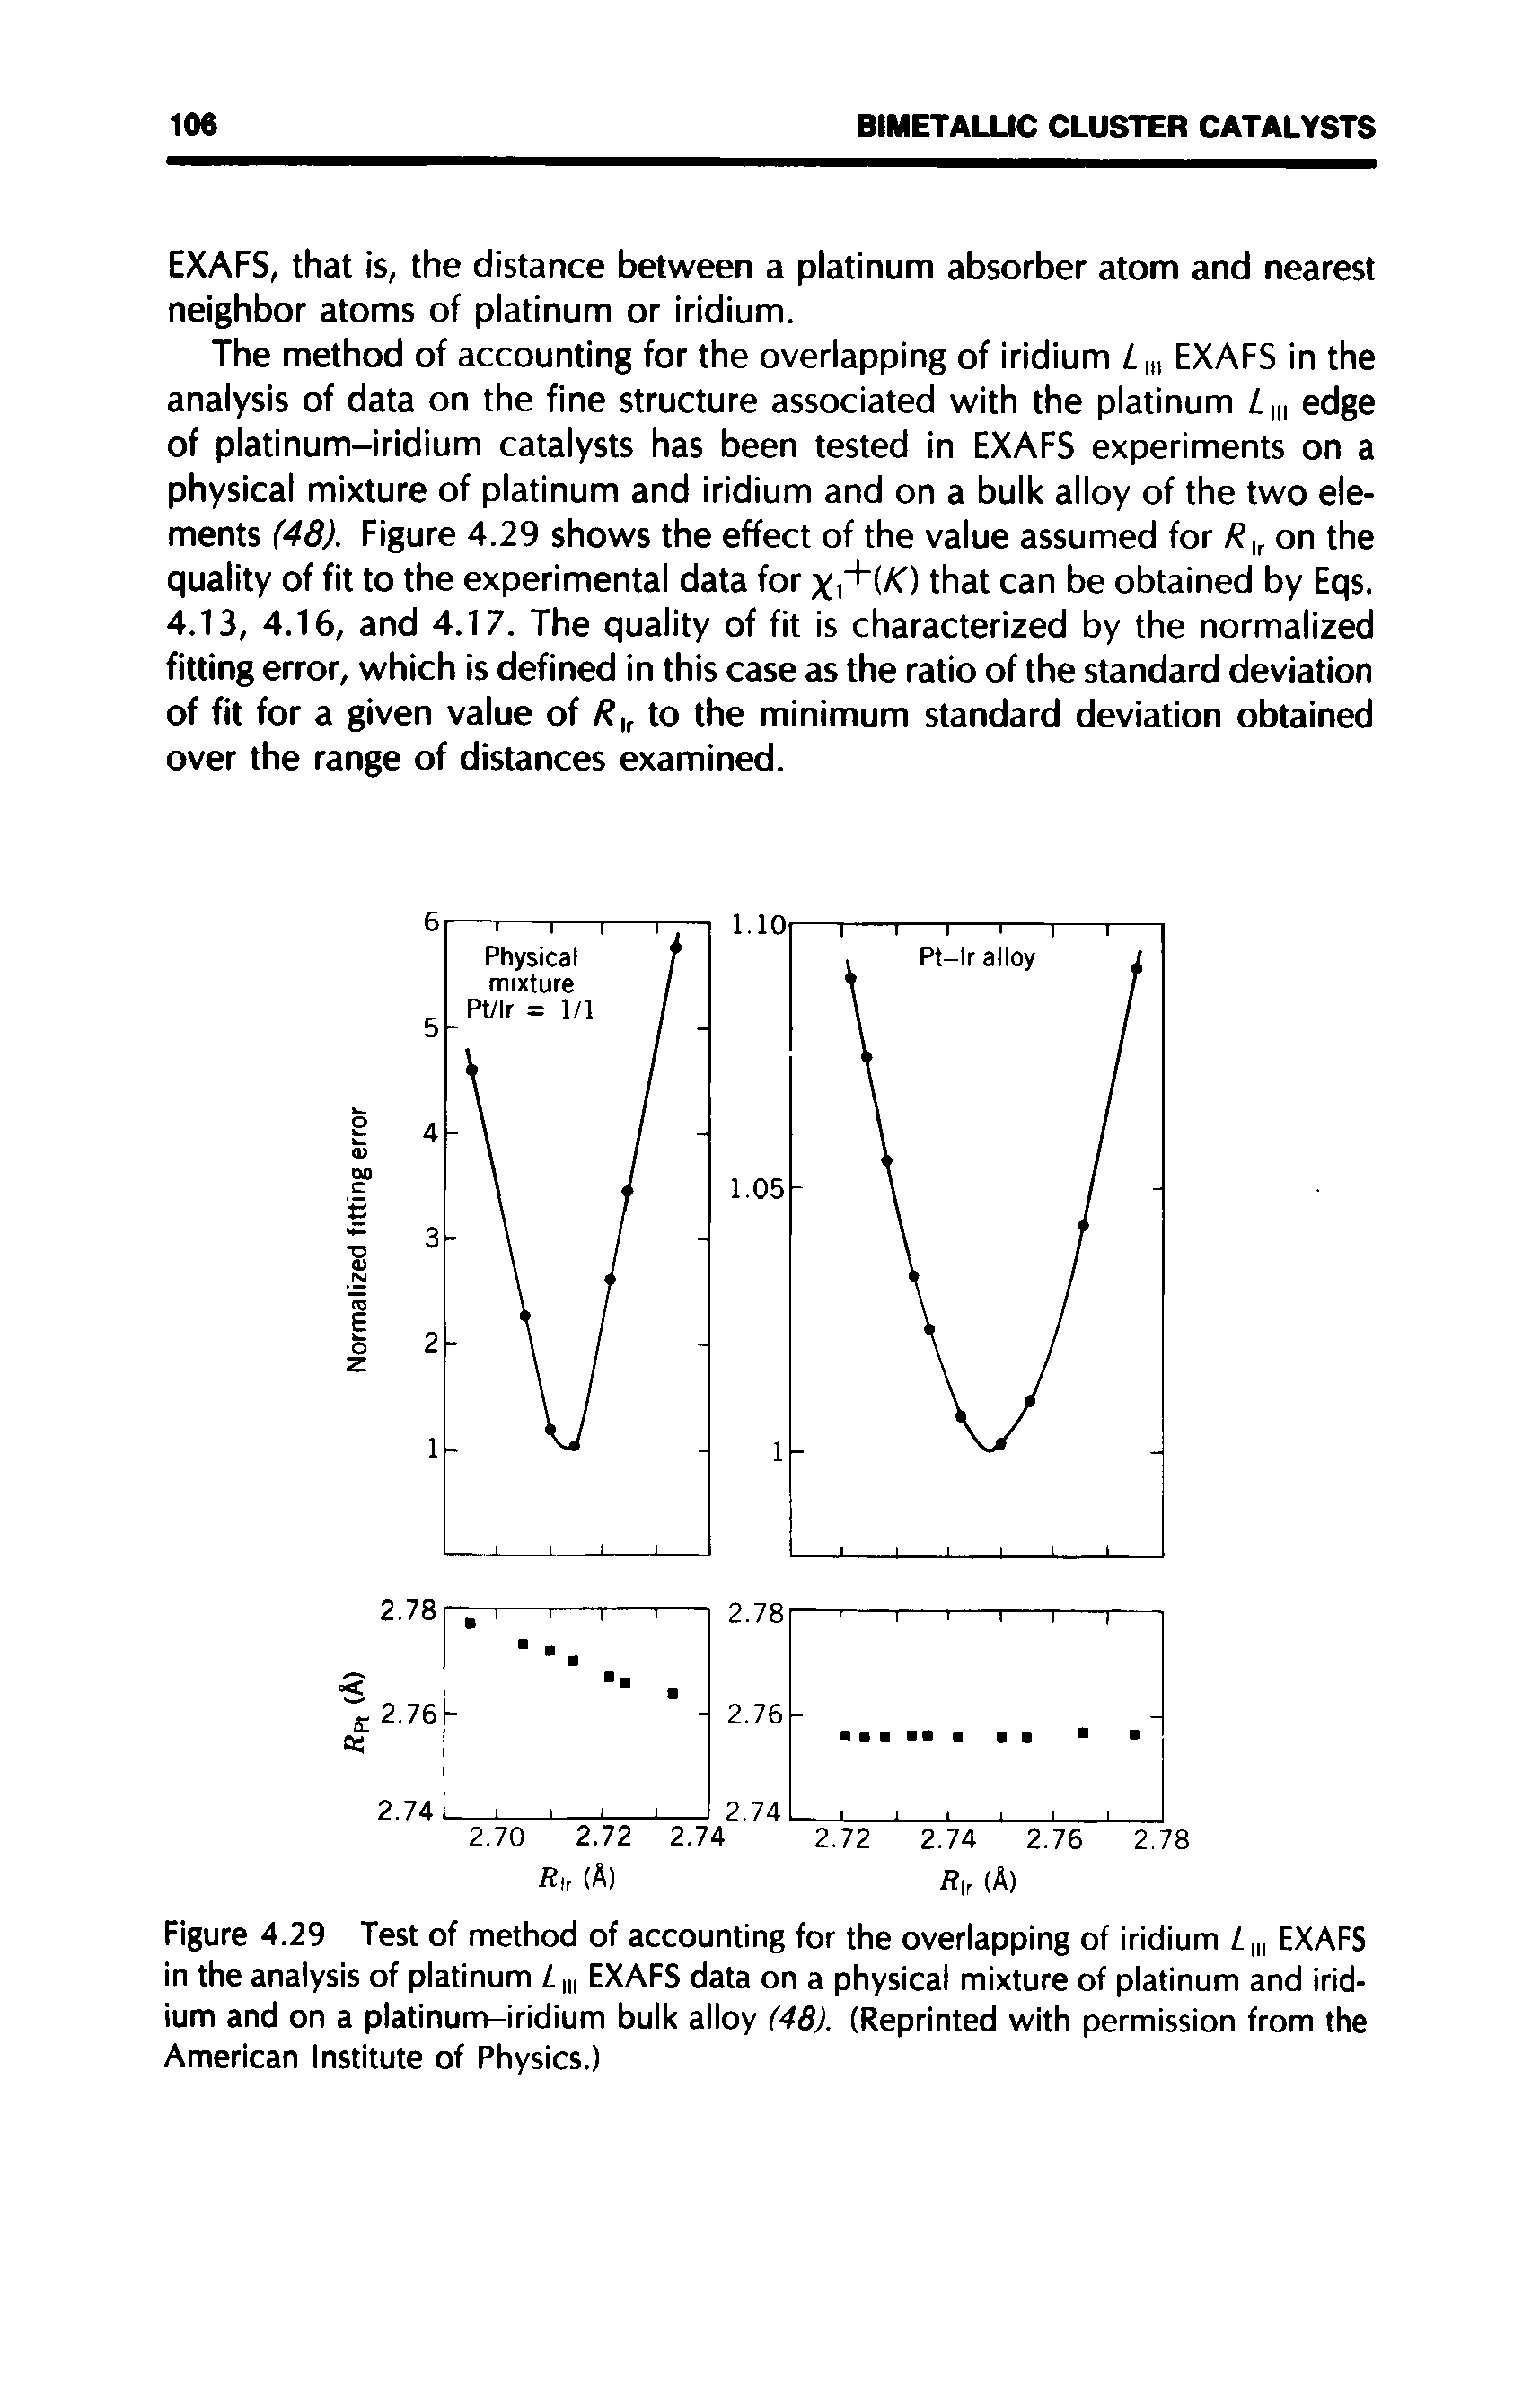 Figure 4.29 Test of method of accounting for the overlapping of iridium Lm EXAFS in the analysis of platinum Zm EXAFS data on a physical mixture of platinum and iridium and on a platinum-iridium bulk alloy (48). (Reprinted with permission from the American Institute of Physics.)...